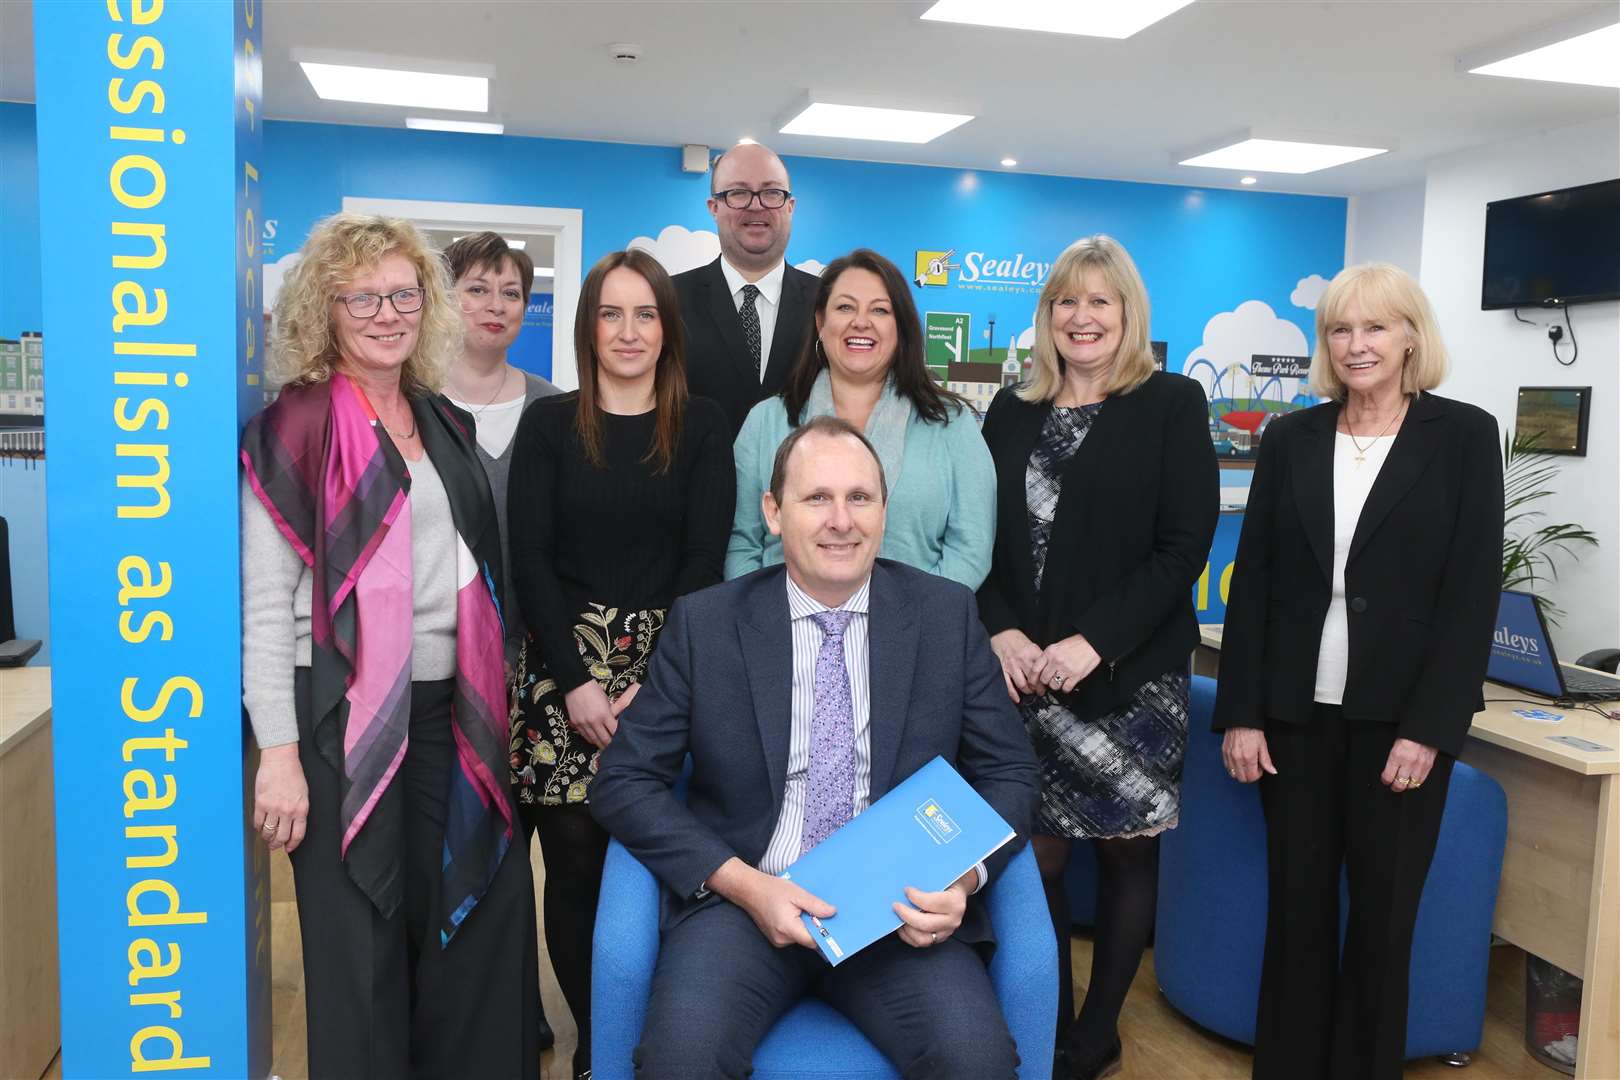 Michael Sears, Managing Director of Sealeys Estate Agents with his staff. Picture by: John Westhrop (1095067)